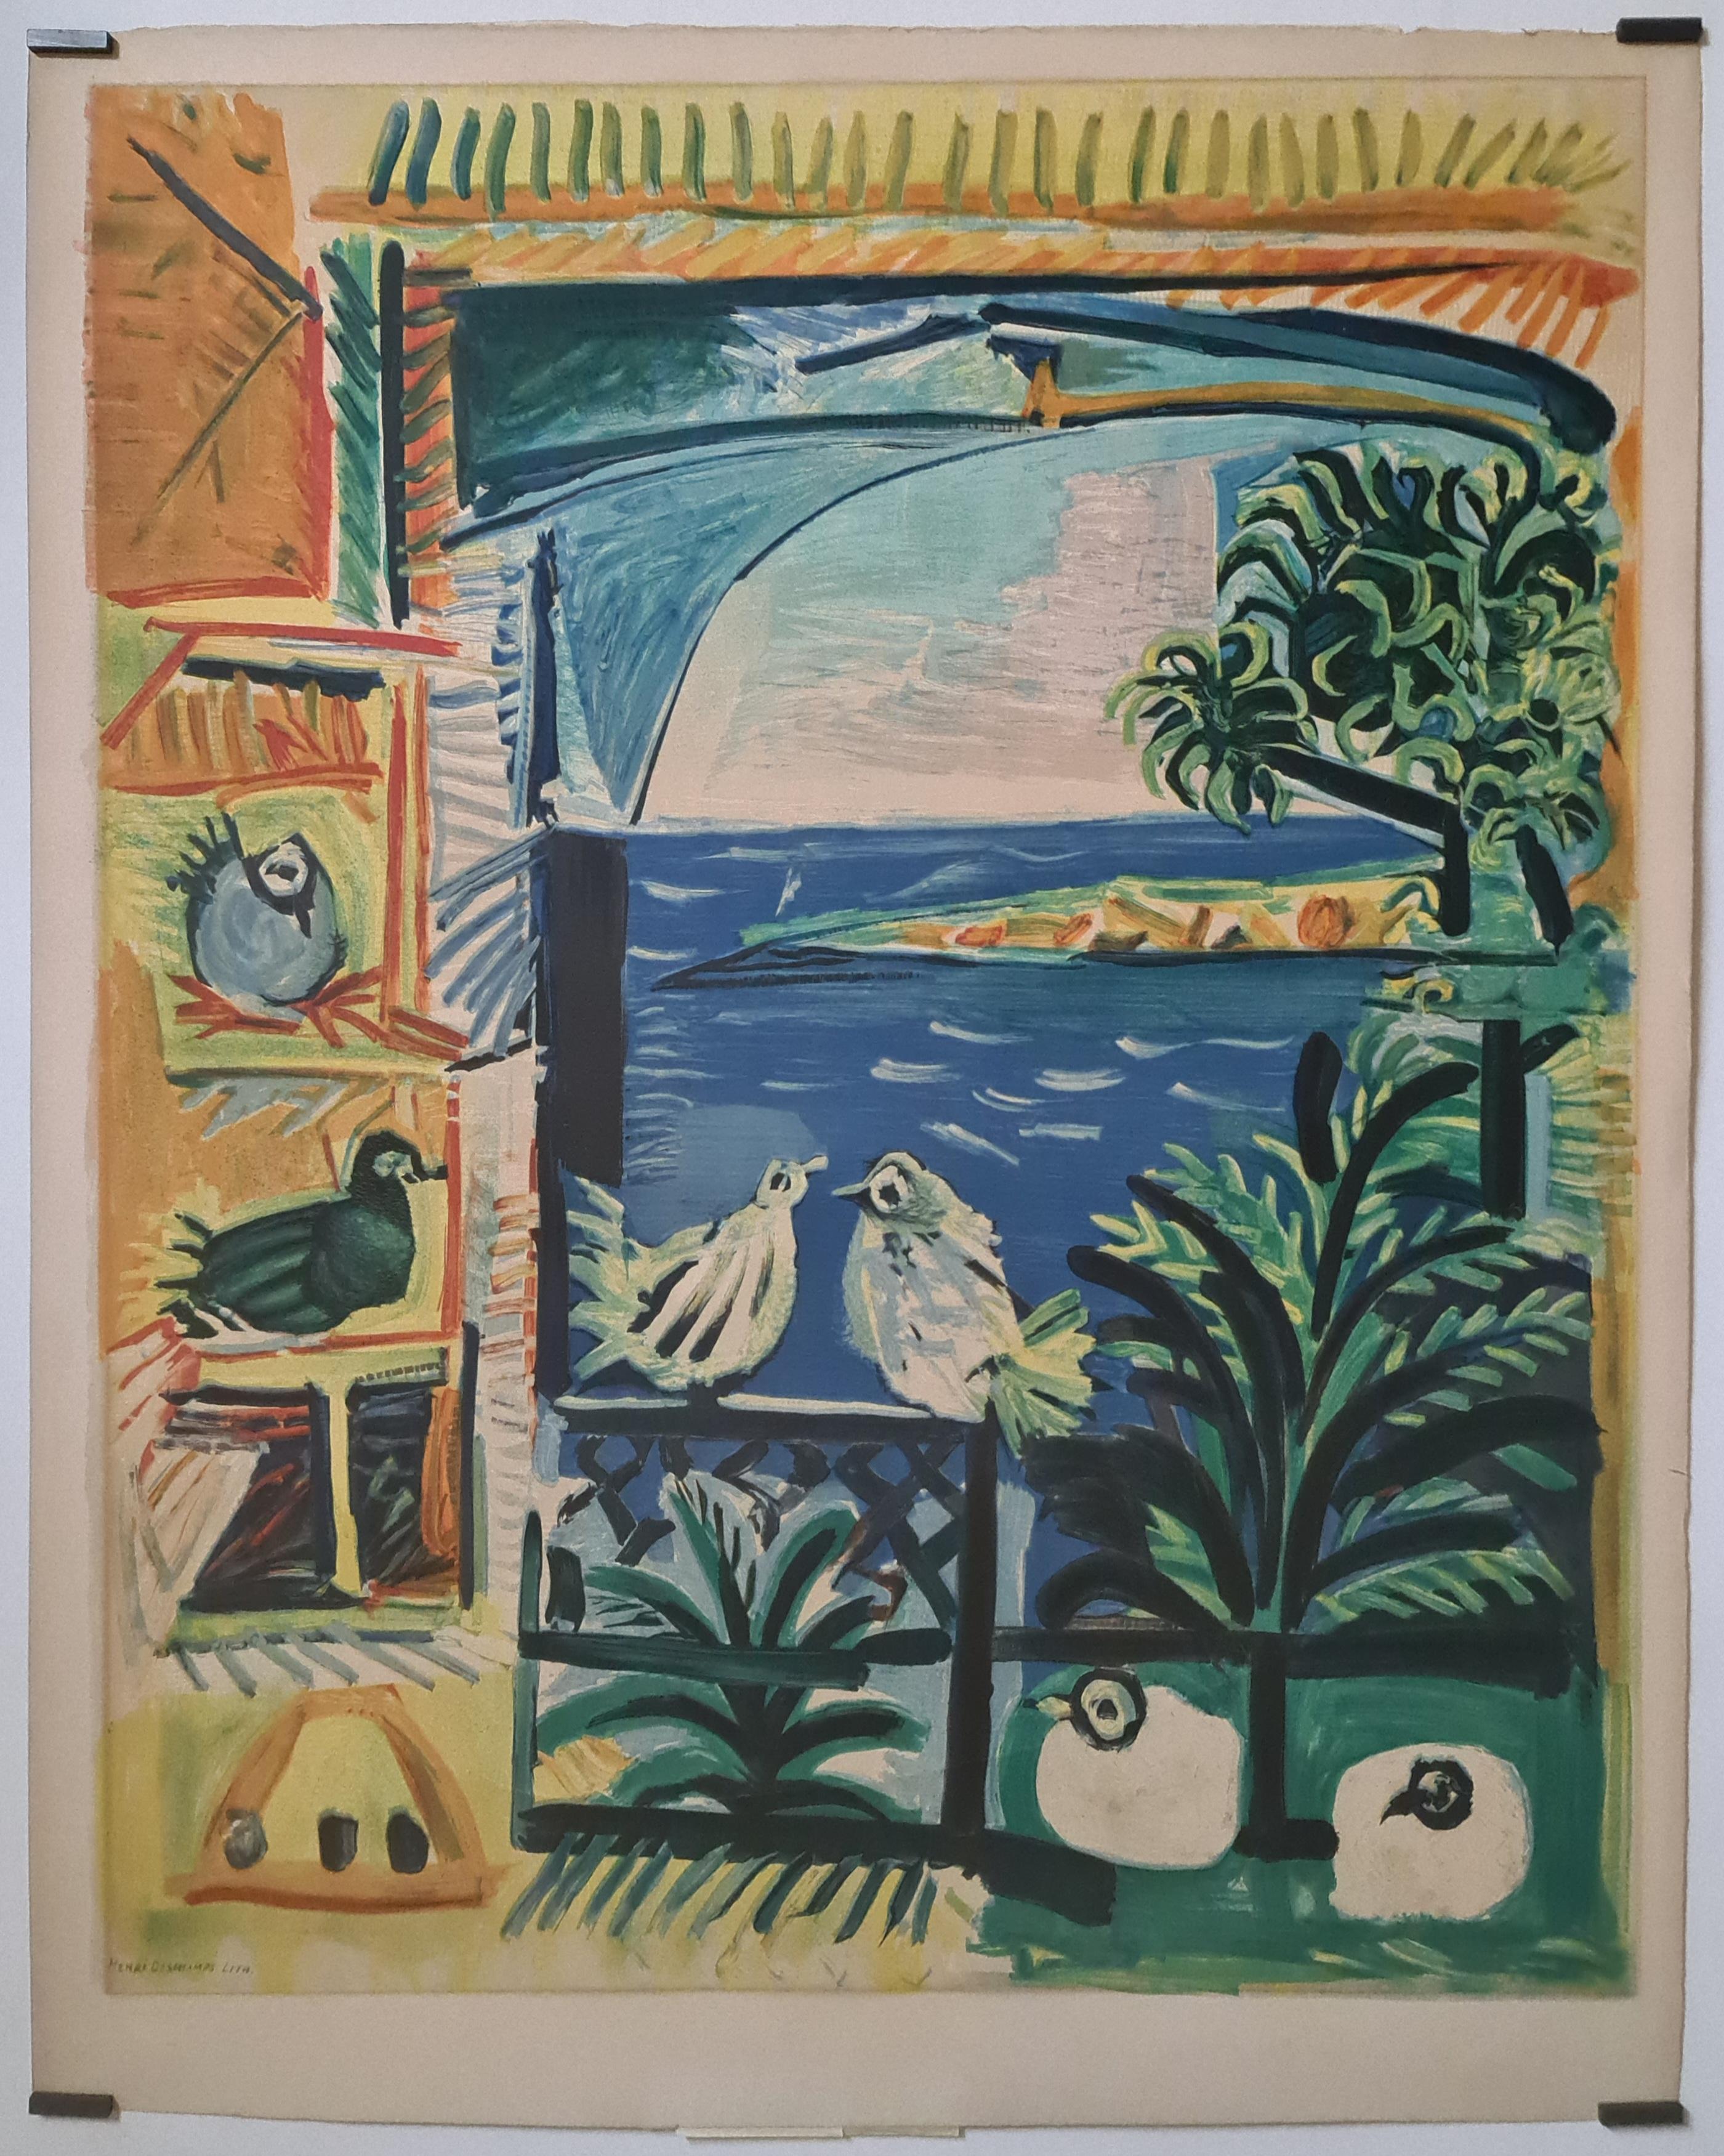 Beautiful lithograph by Picasso in 1962 in homage to Matisse for the Côte d'Azur and Cannes.

After Matisse's death in 1954, Picasso was deeply saddened. He moved his family to a large villa near Cannes, in the south of France, and painted a series